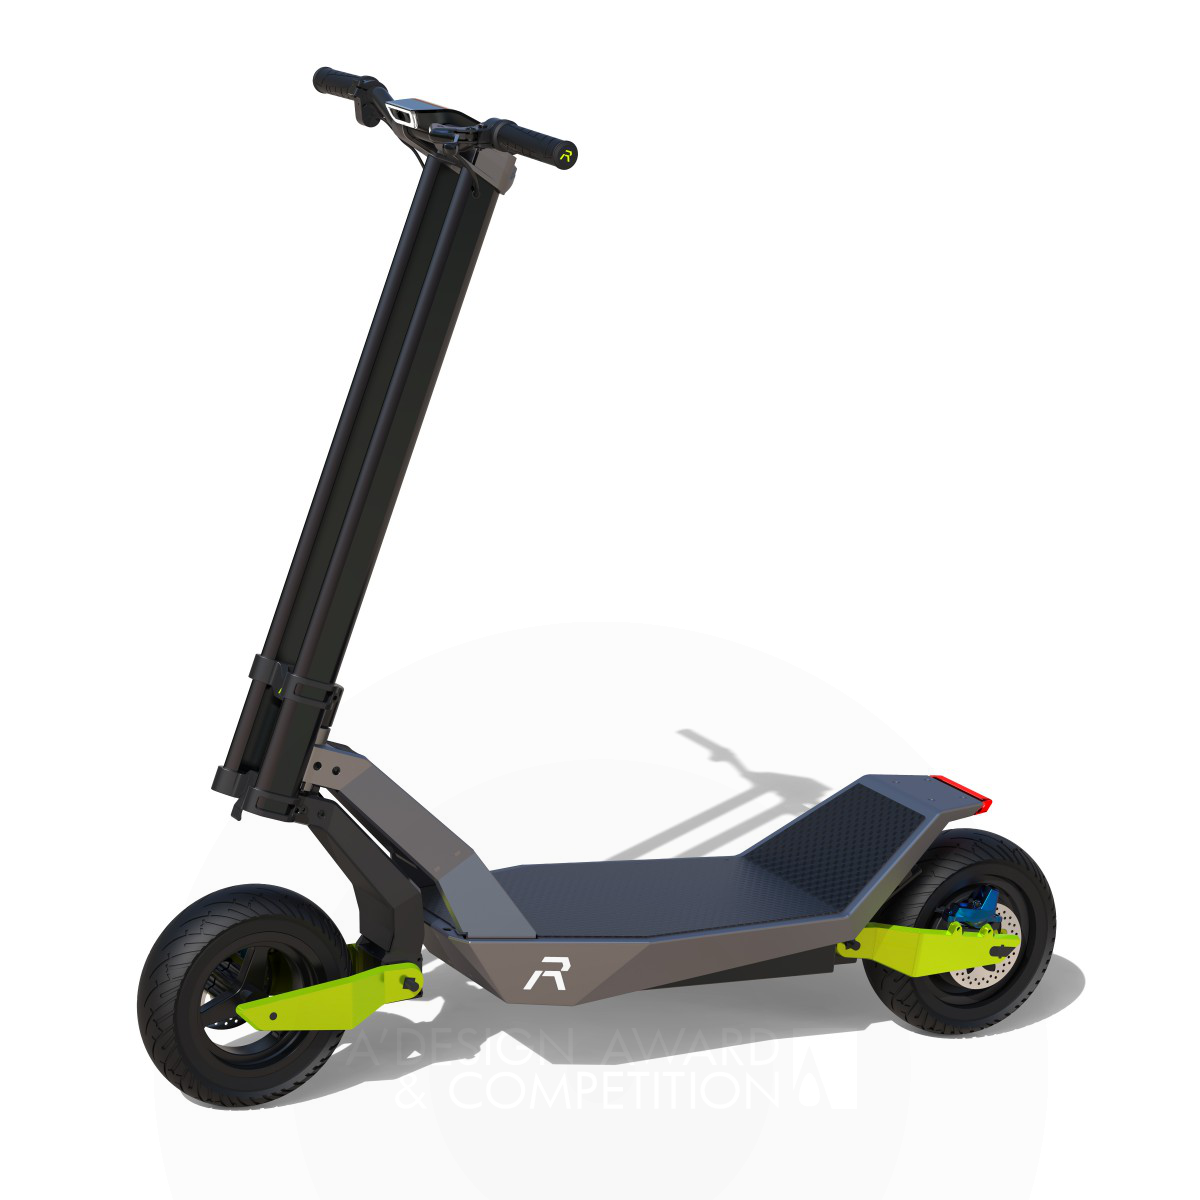 Reev Cruiser: The Future of Micromobility